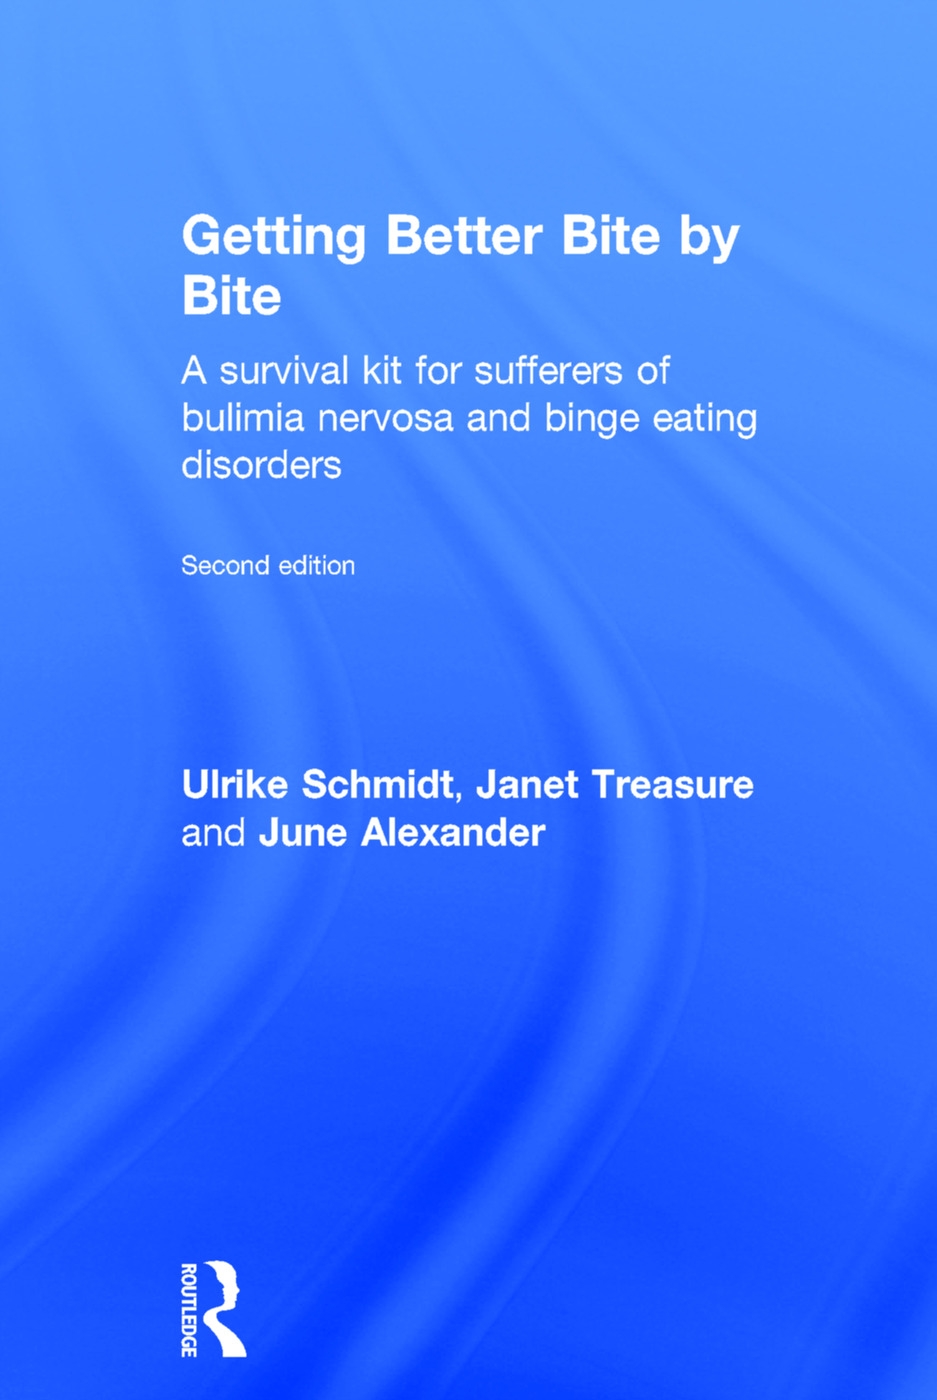 Getting Better Bite by Bite: A Survival Kit for Sufferers of Bulimia Nervosa and Binge Eating Disorders